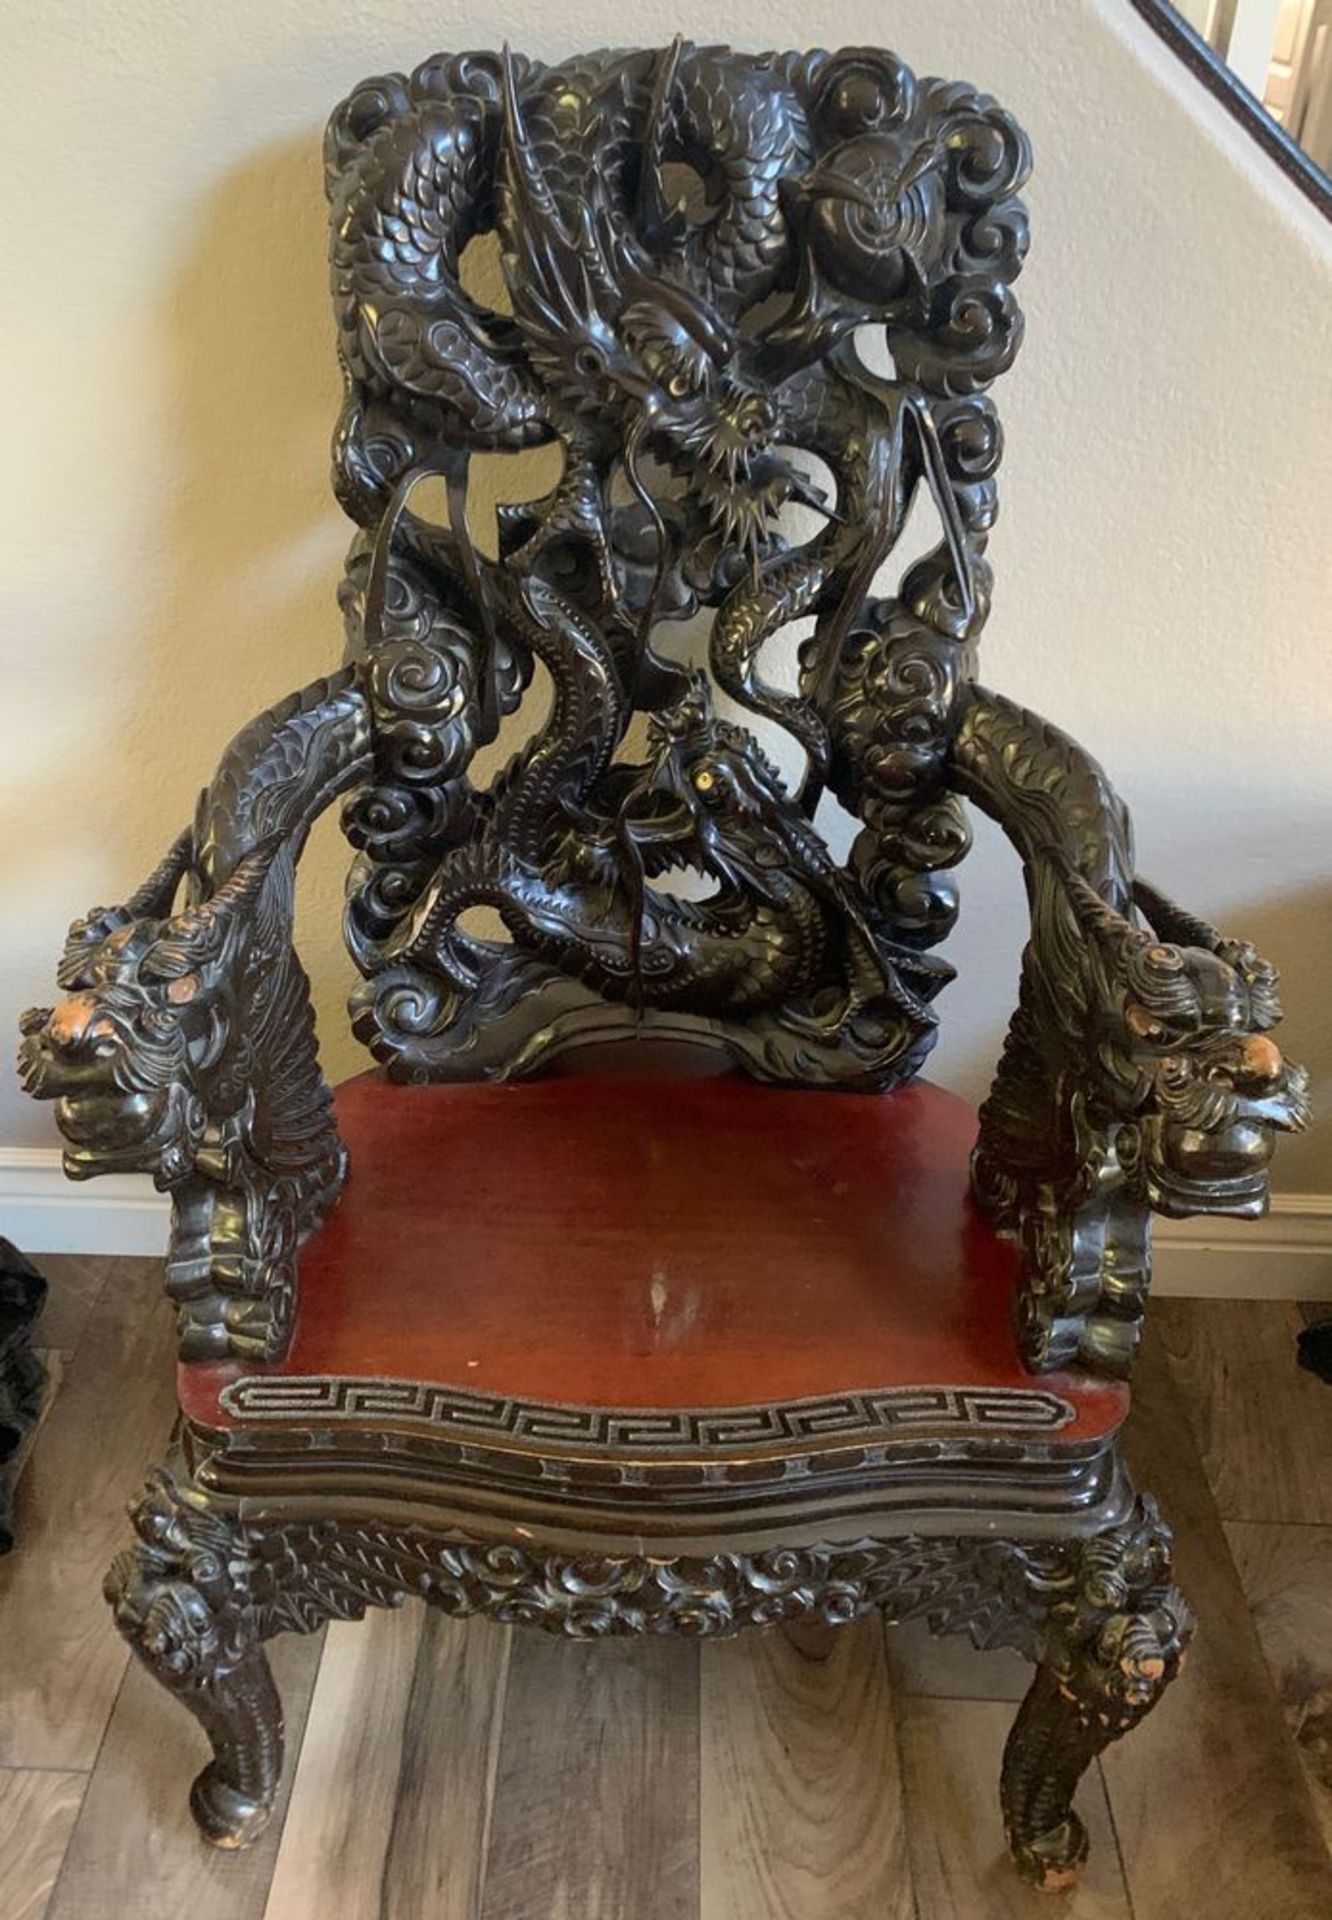 Antique King's Throne Chair, Hand Carved Wood, believed to be 150+ years old